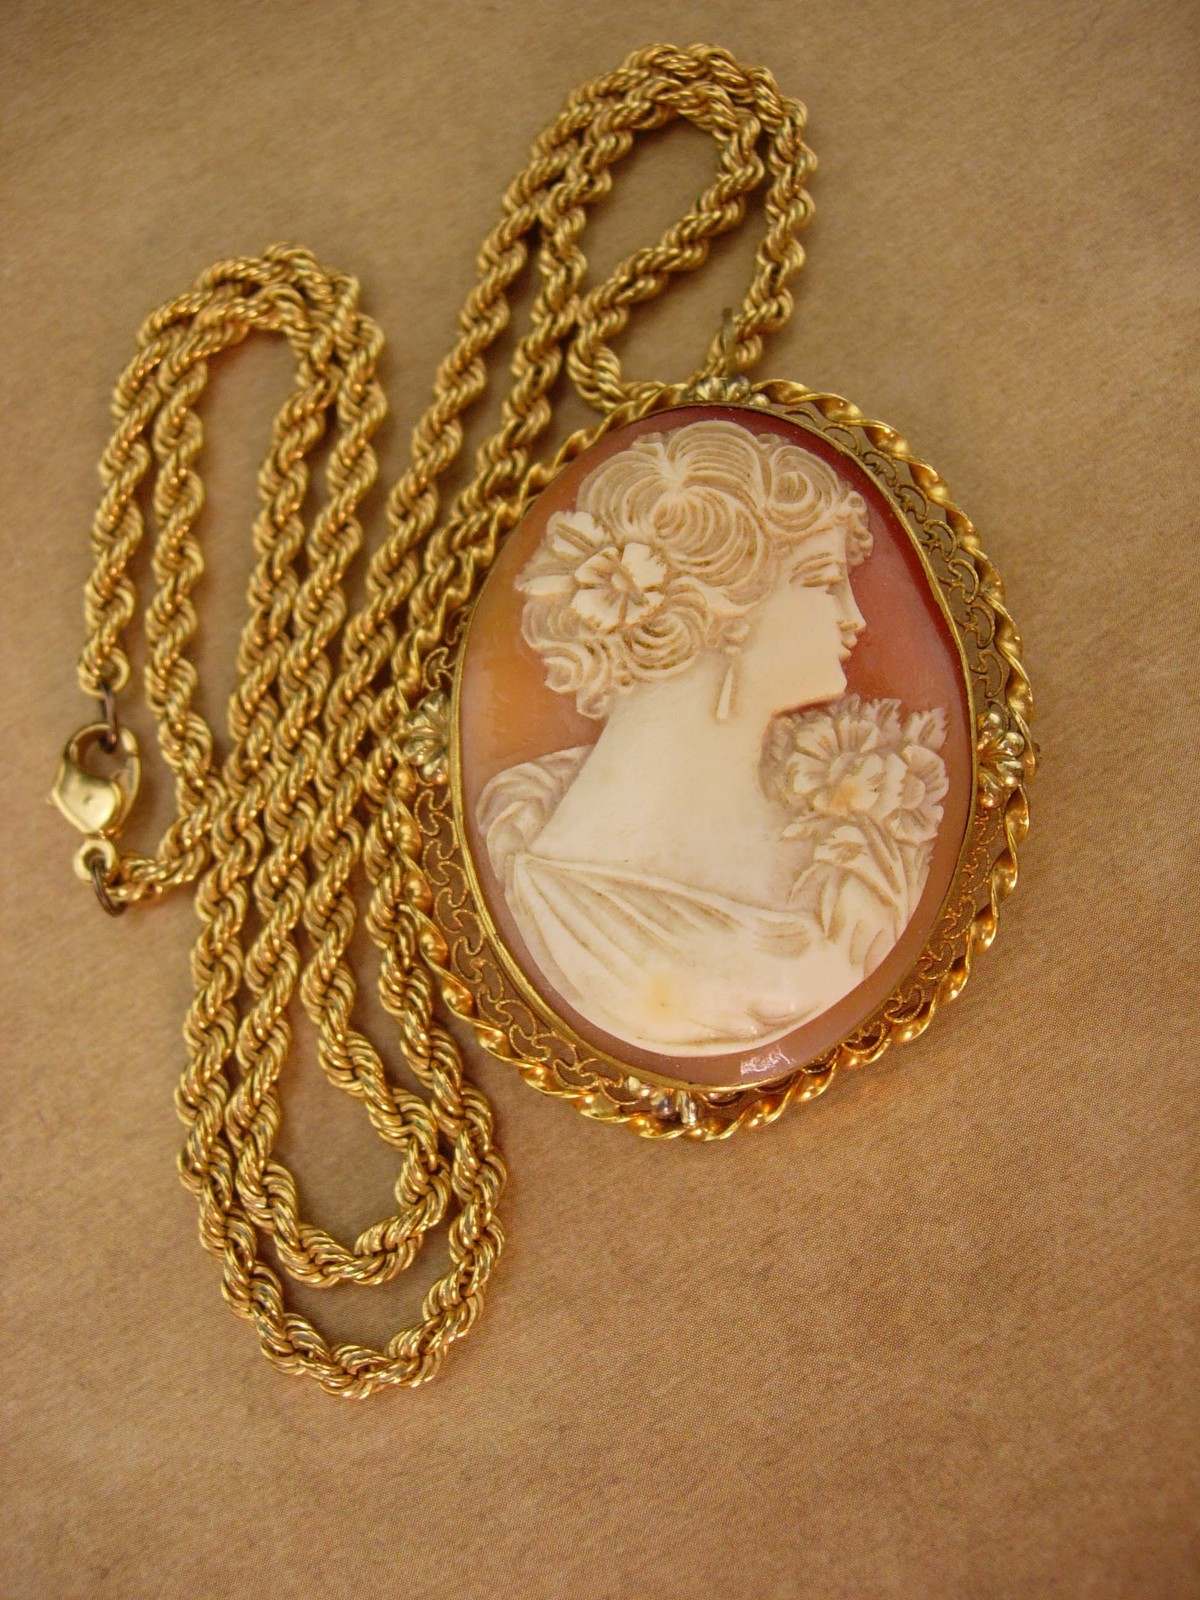 Primary image for Antique genuine Cameo necklace - Vintage victorian CARVED PORTRAIT BROOCH -  190